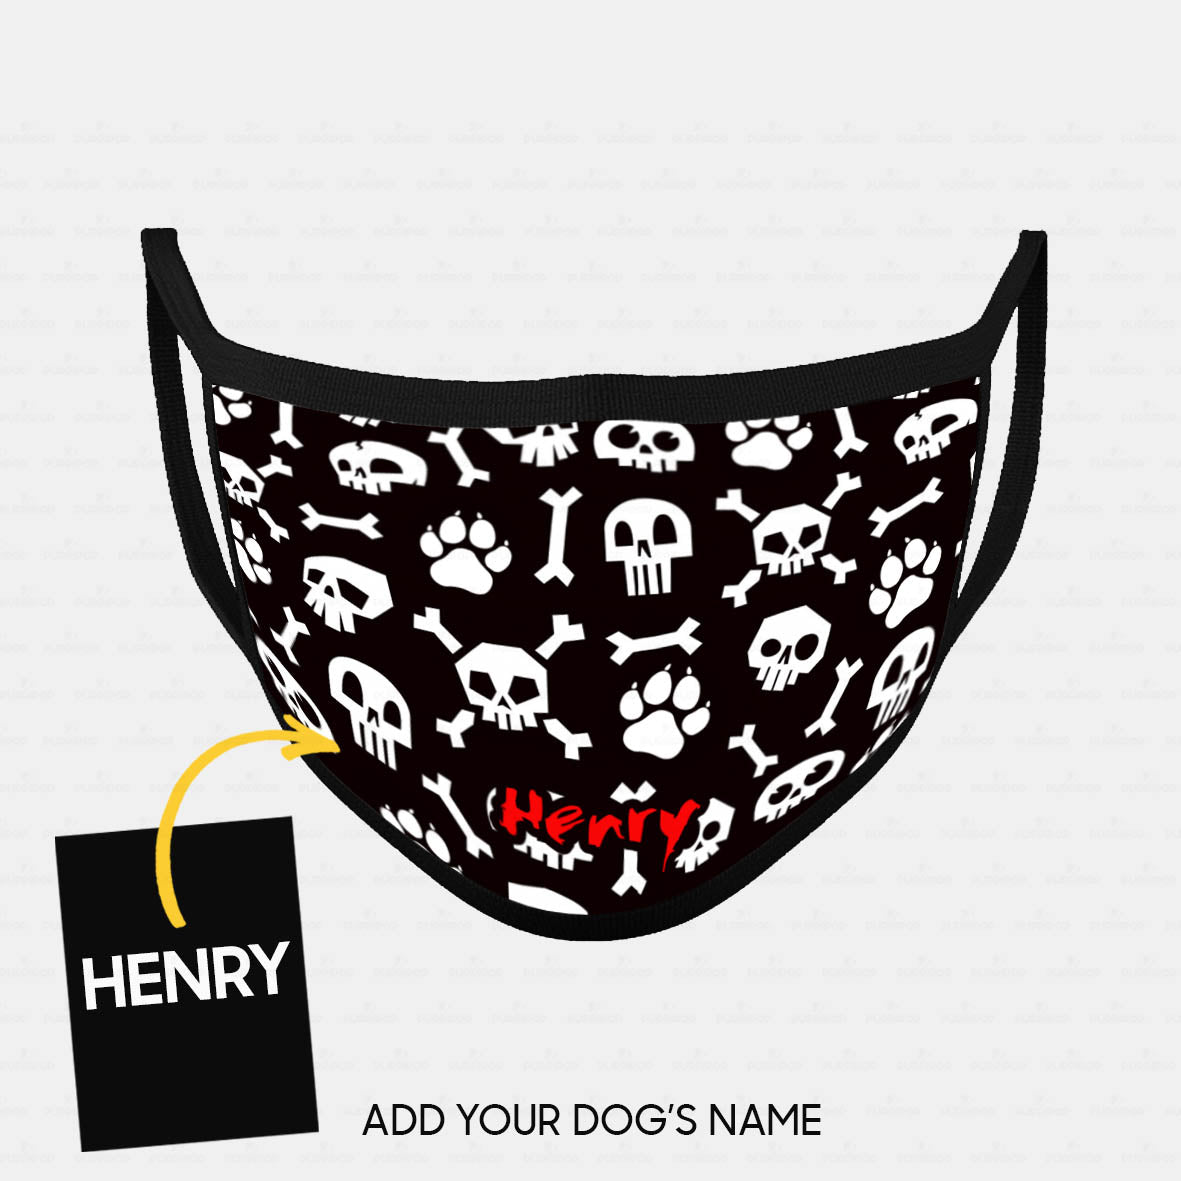 Personalized Dog Gift Idea - Skulls, Paws And Bones For Dog Lovers - Cloth Mask